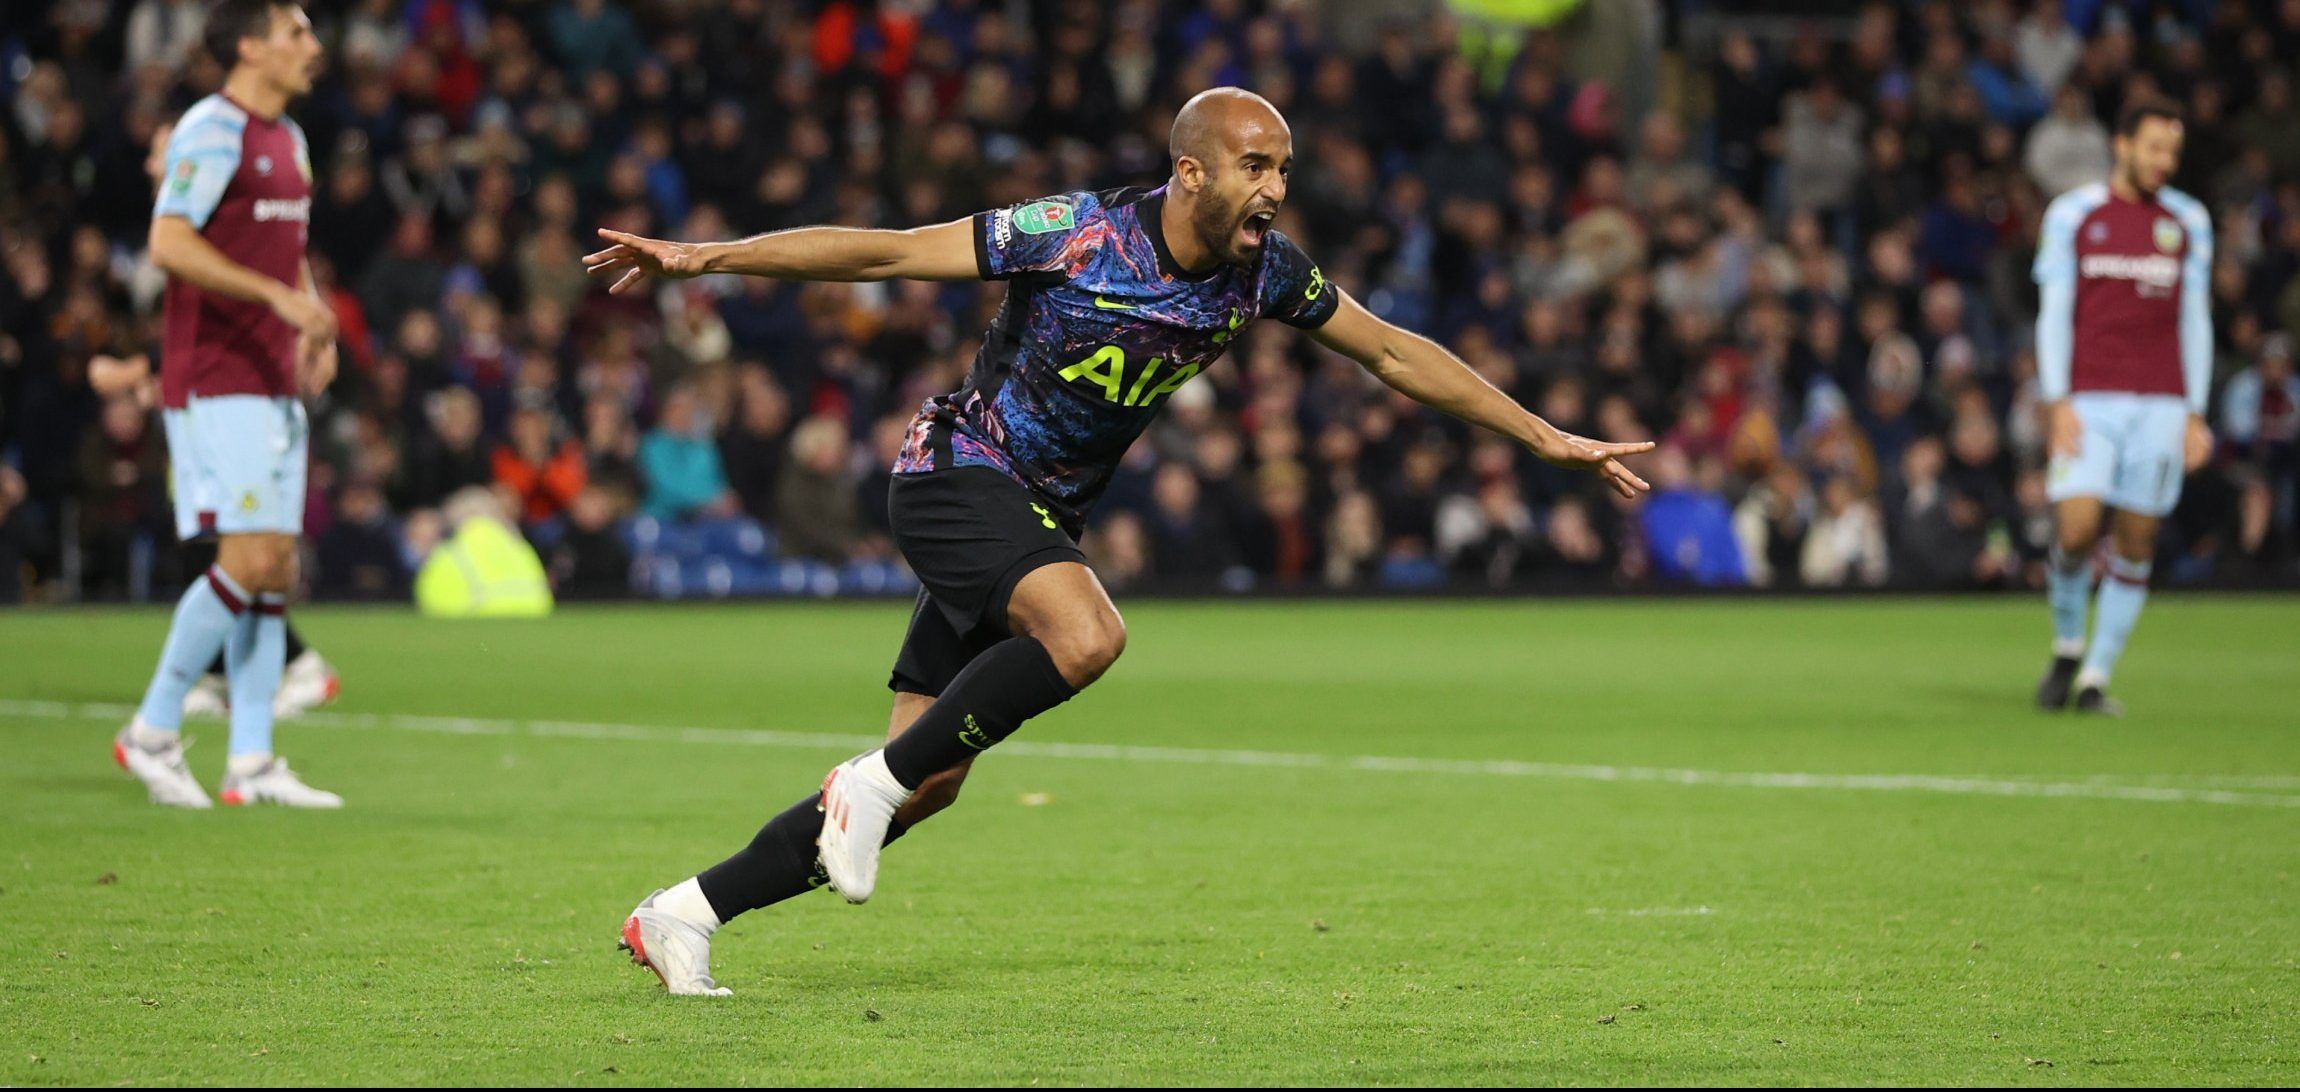 Spurs winger Lucas Moura wheels away in celebration after scoring against Burnley in the Carabao Cup